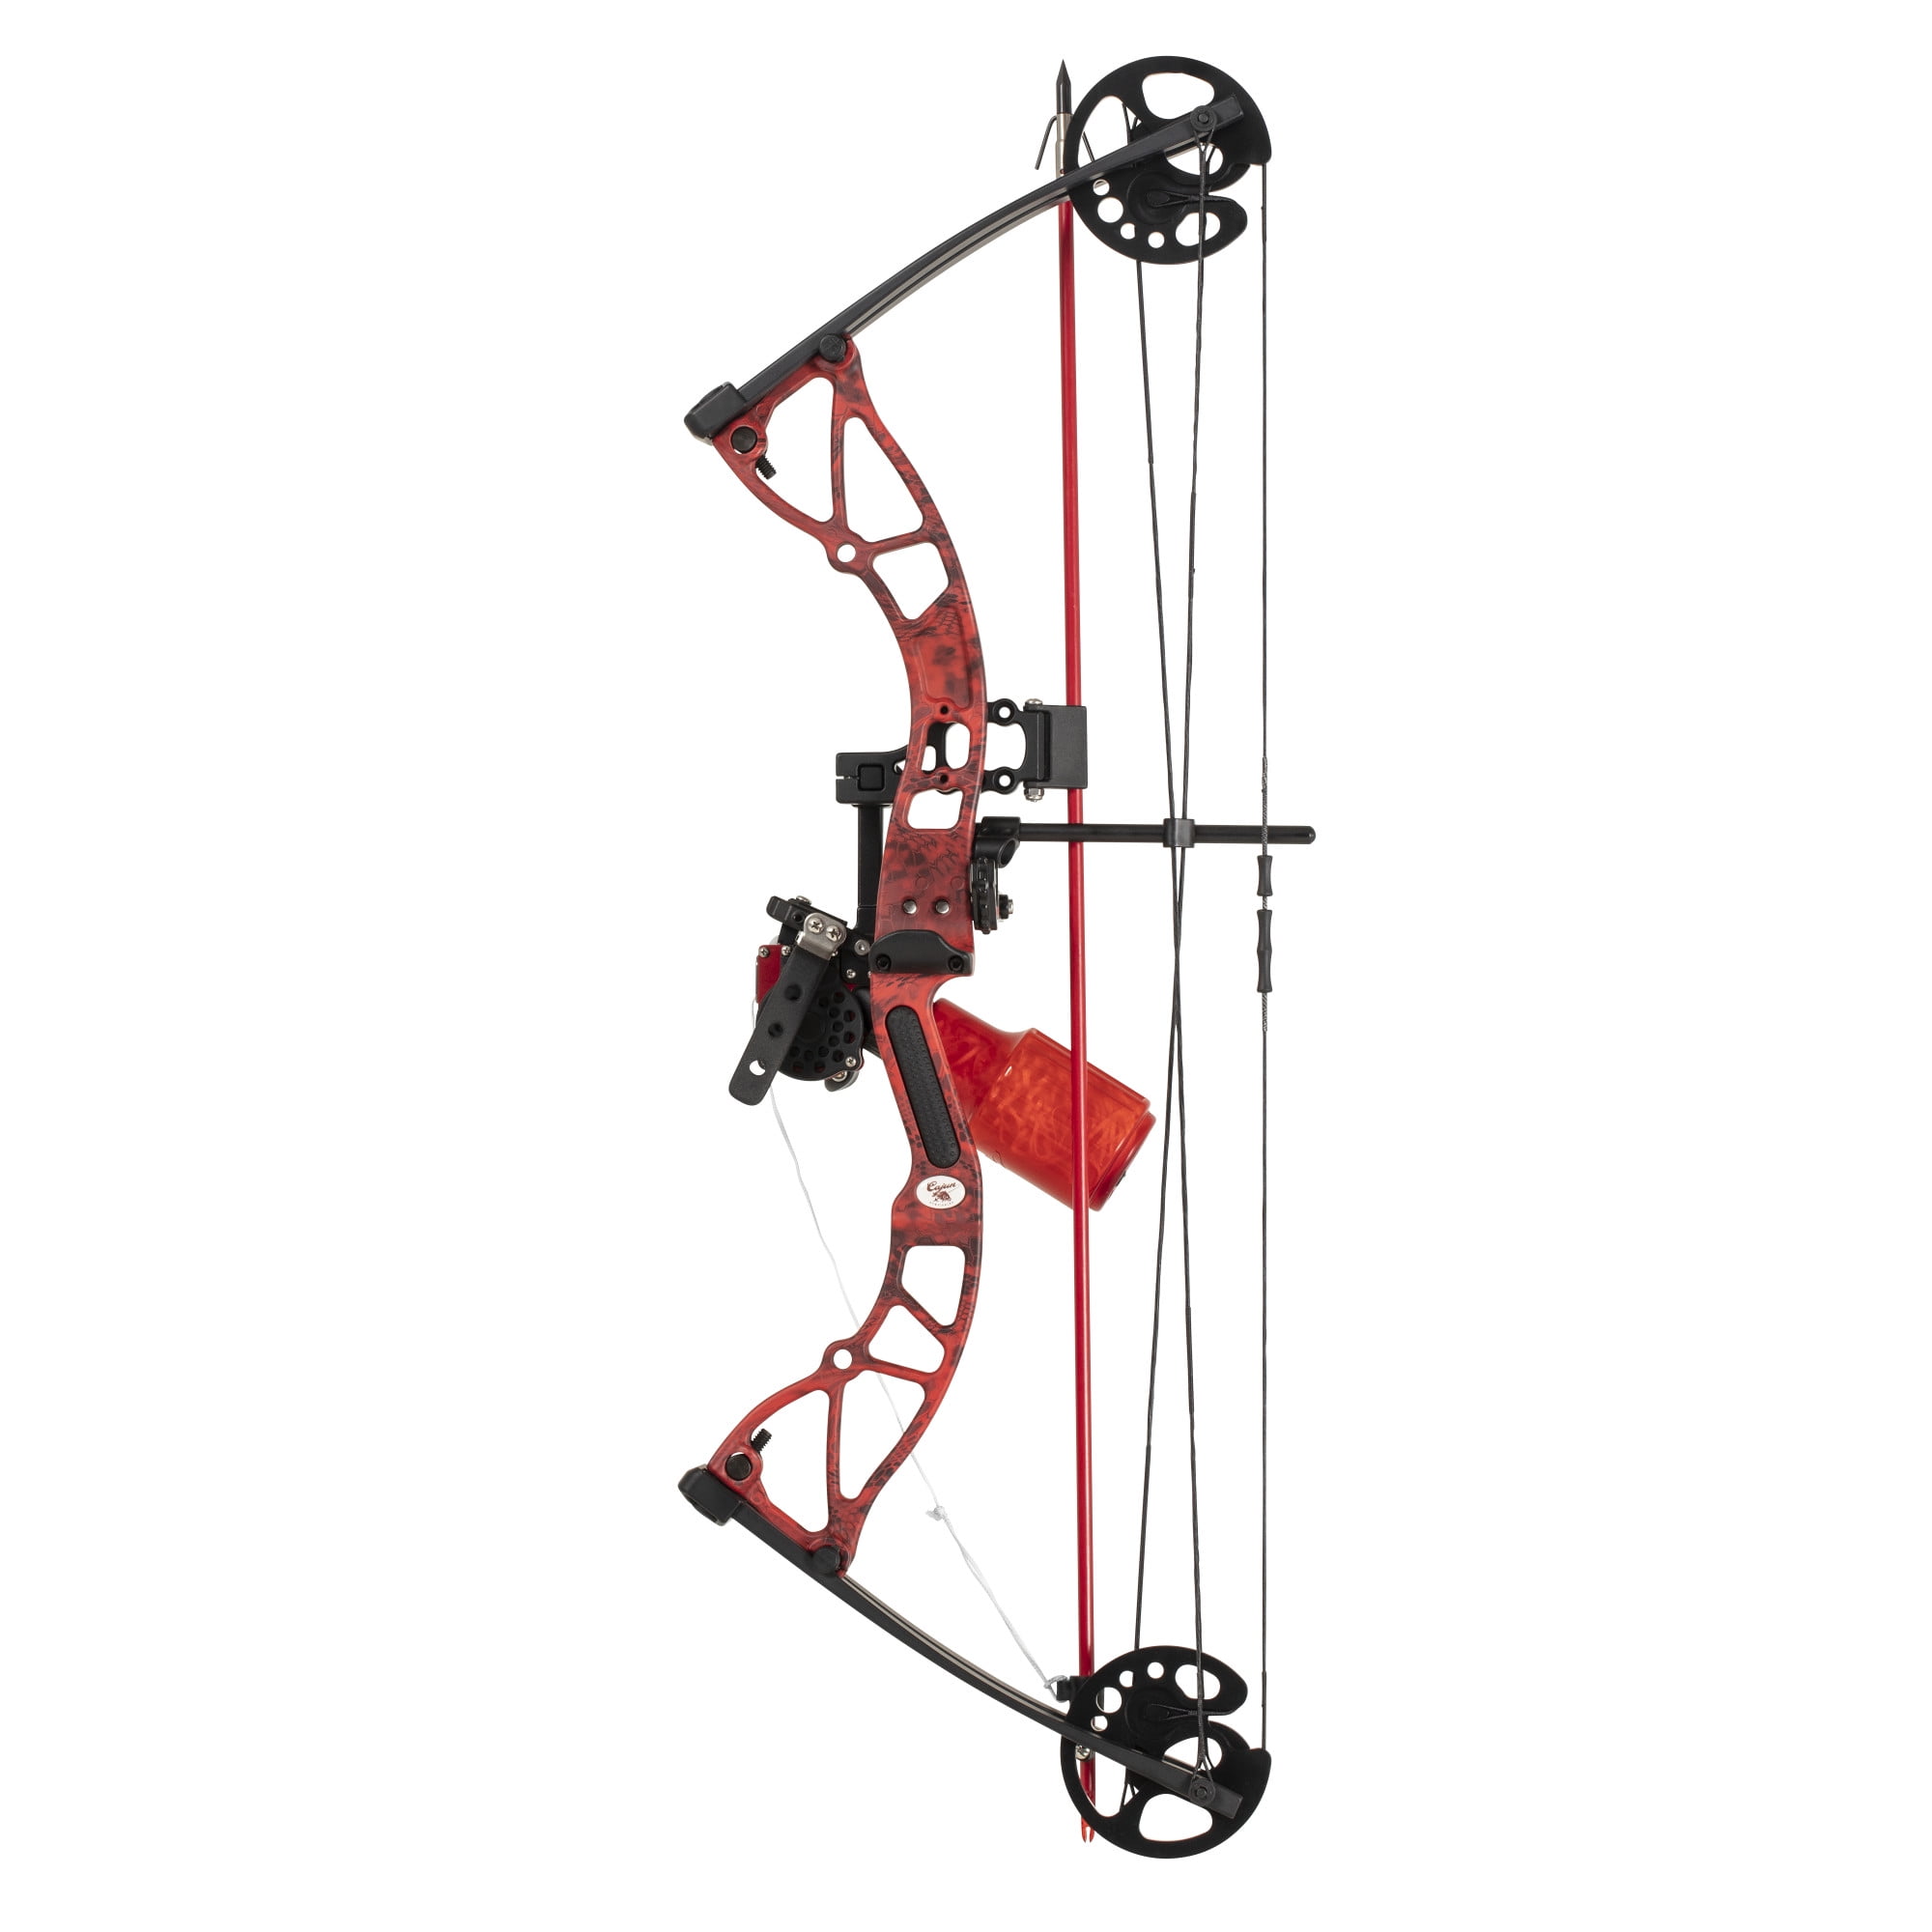 Nouveau Muzzy Bowfishing Outlet Vice Bow fishing Bow LH 